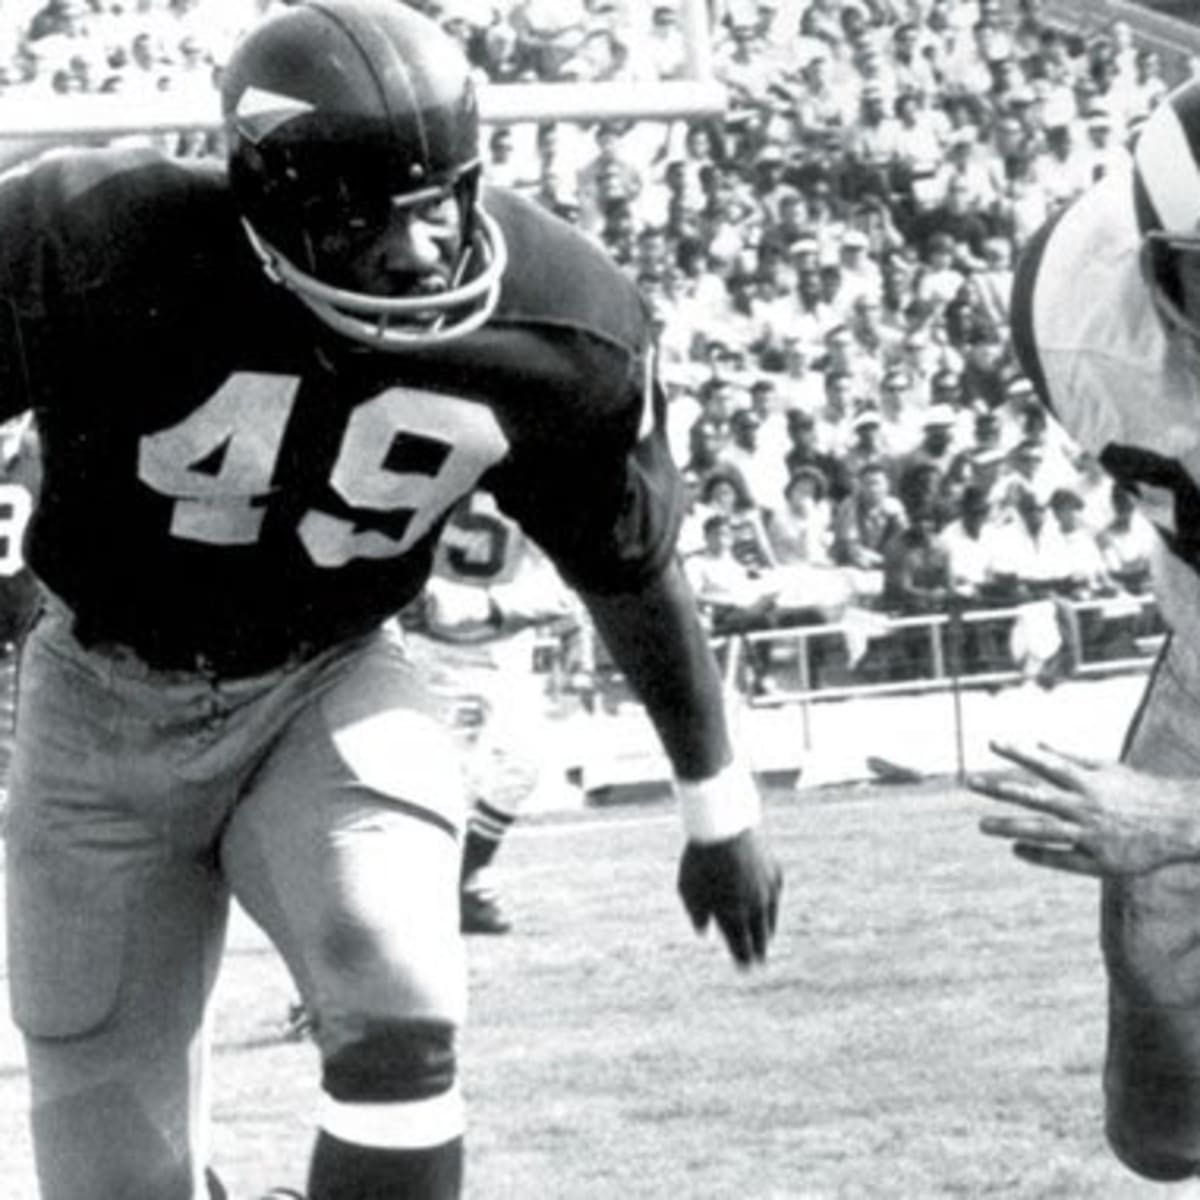 Bobby Mitchell: A tribute to the most important Redskin